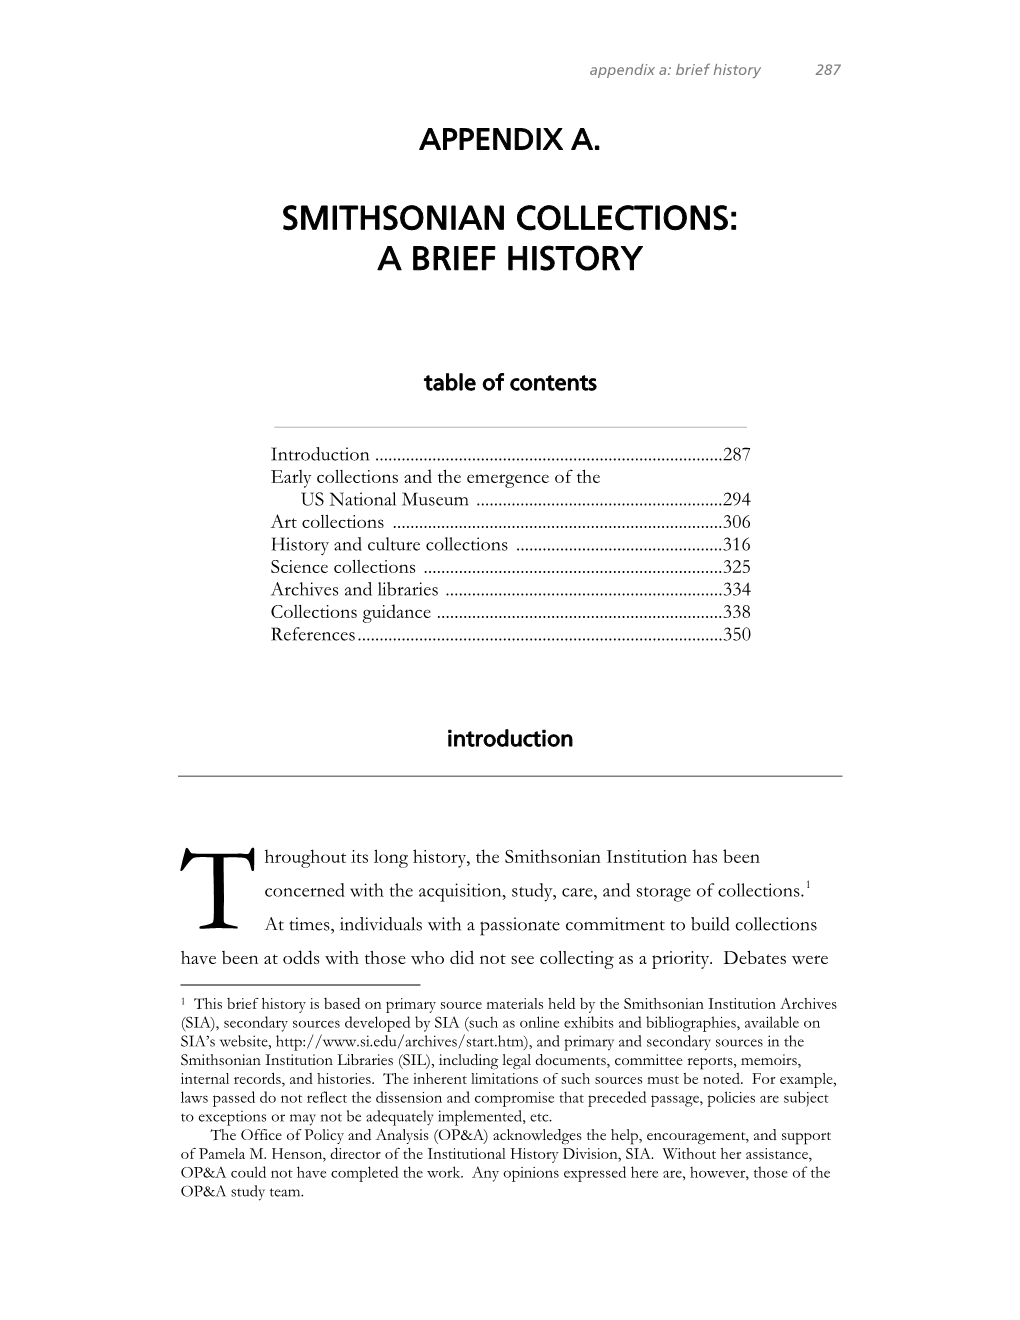 Smithsonian Collections: a Brief History